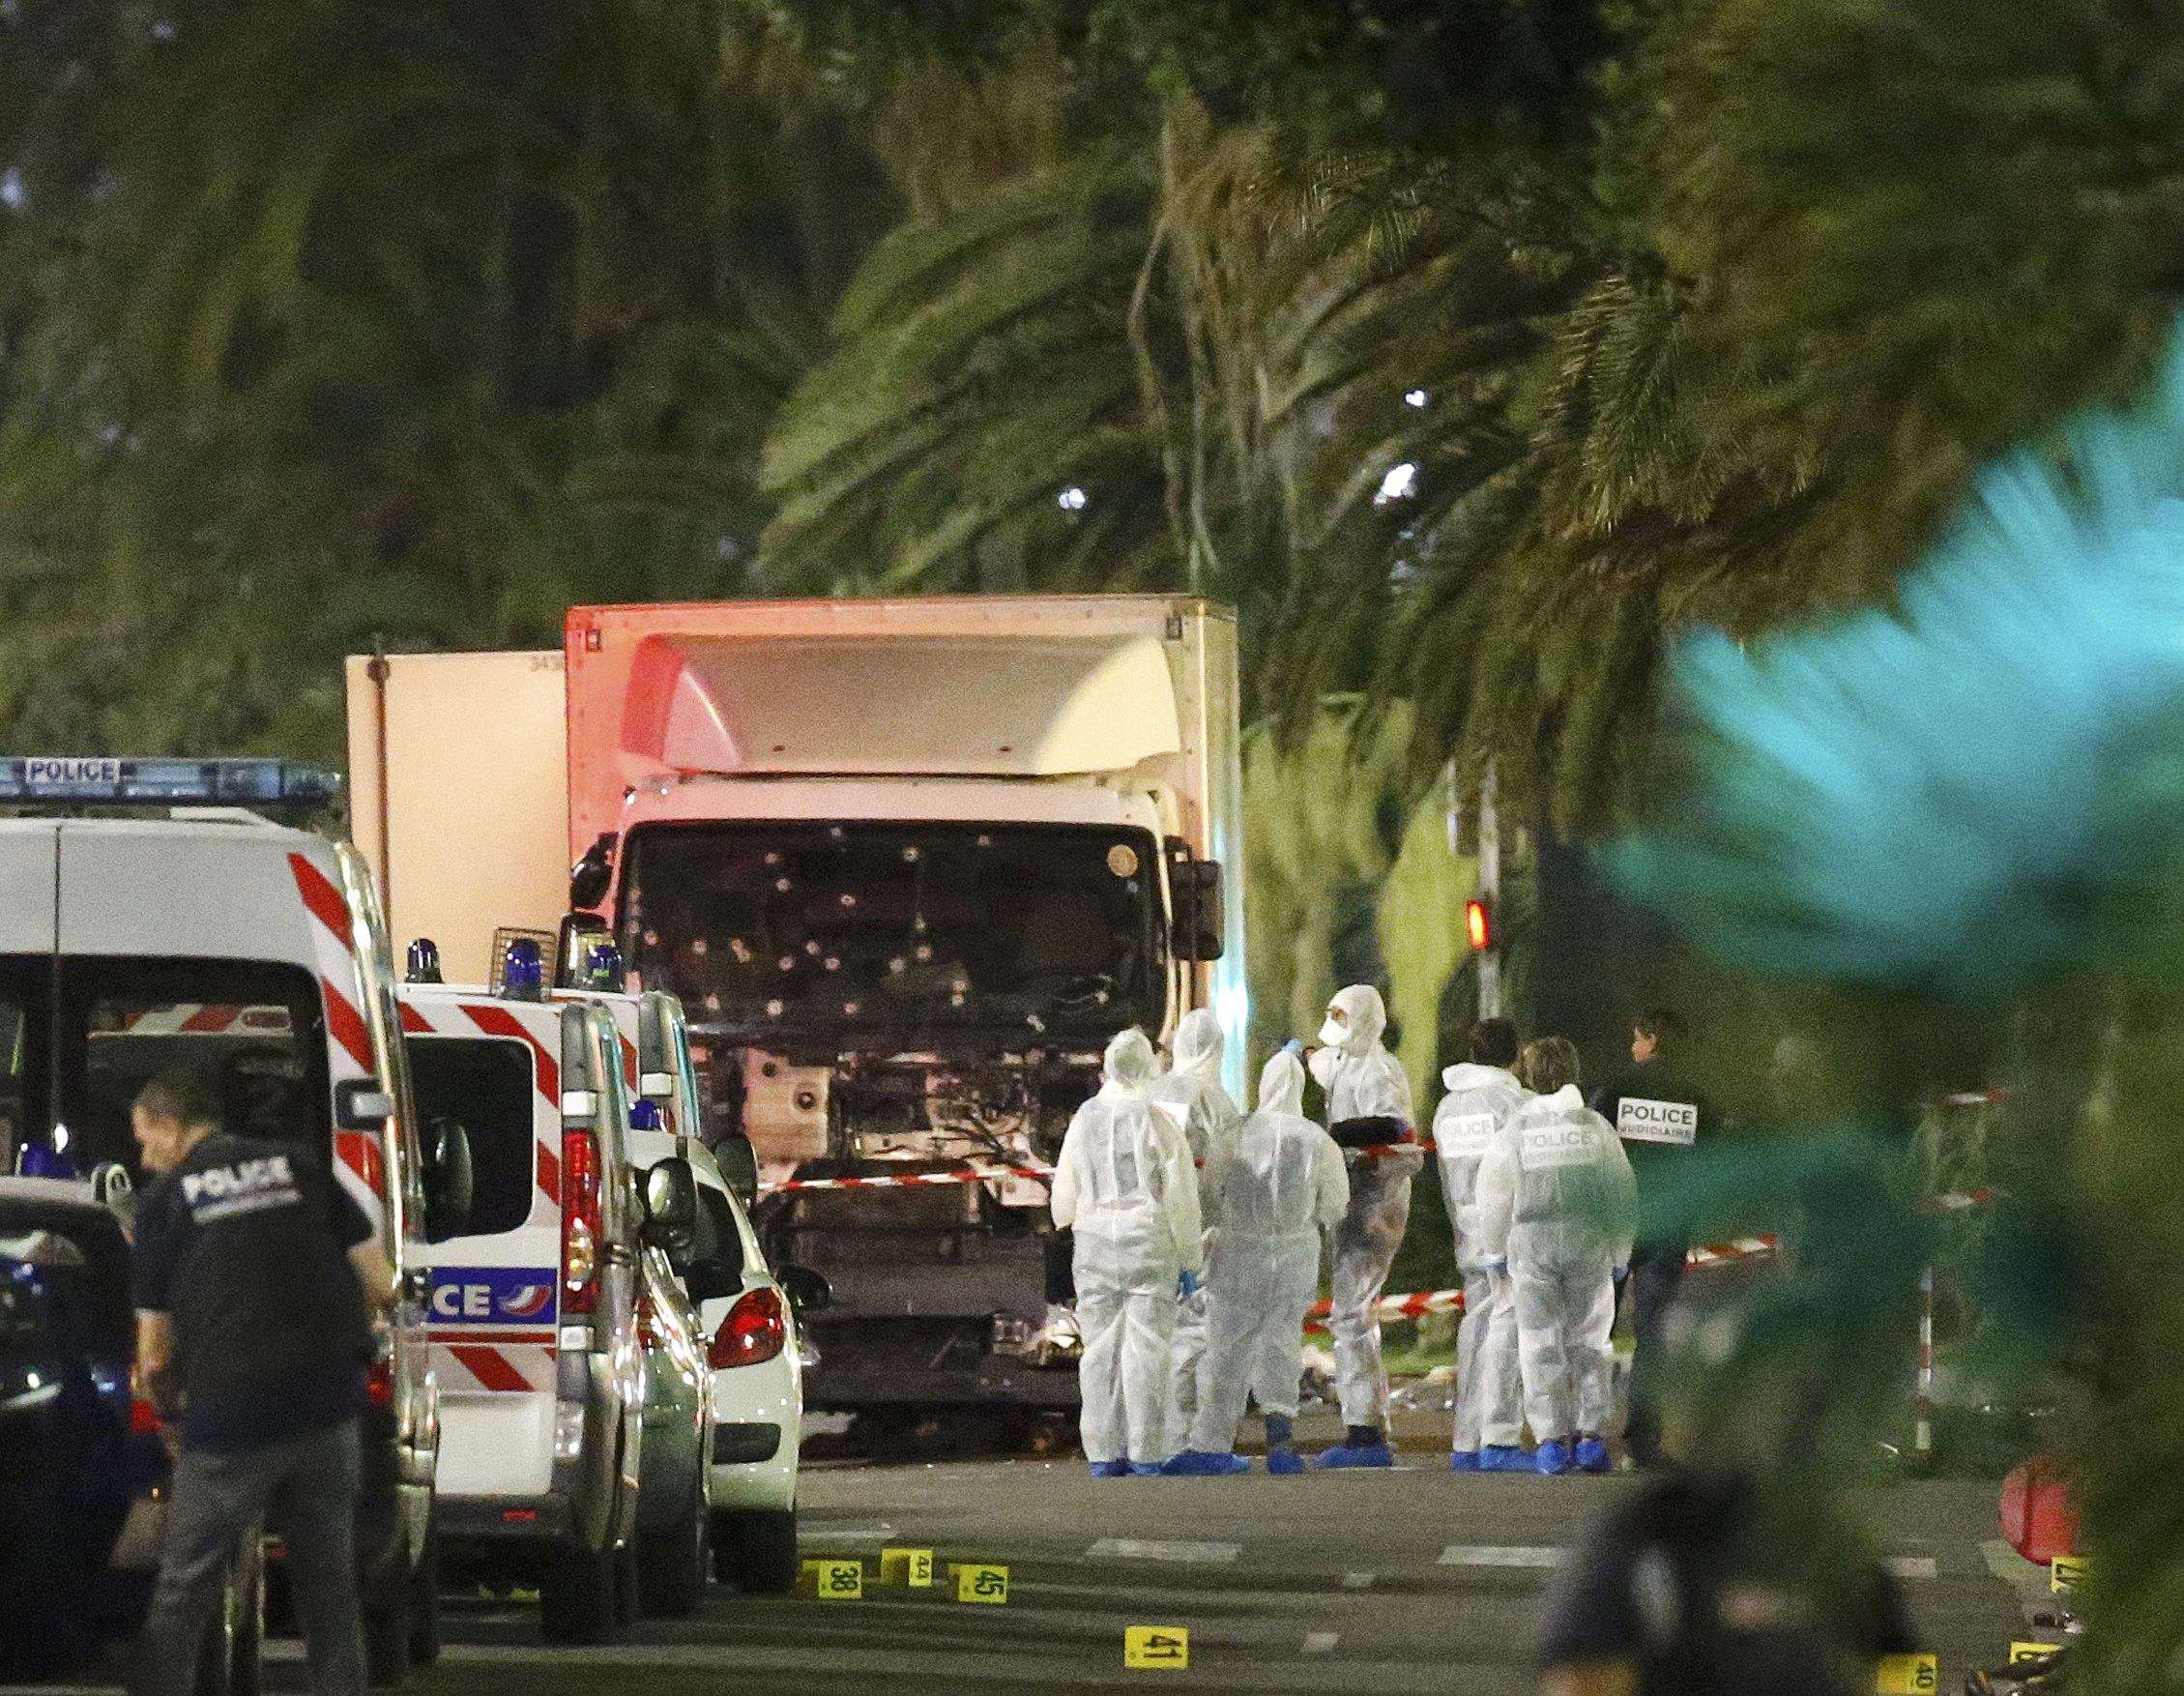 Authorities say at least 80 are dead after the atrocity on the Nice promenade, with the driver killed in a hail of police gunfire